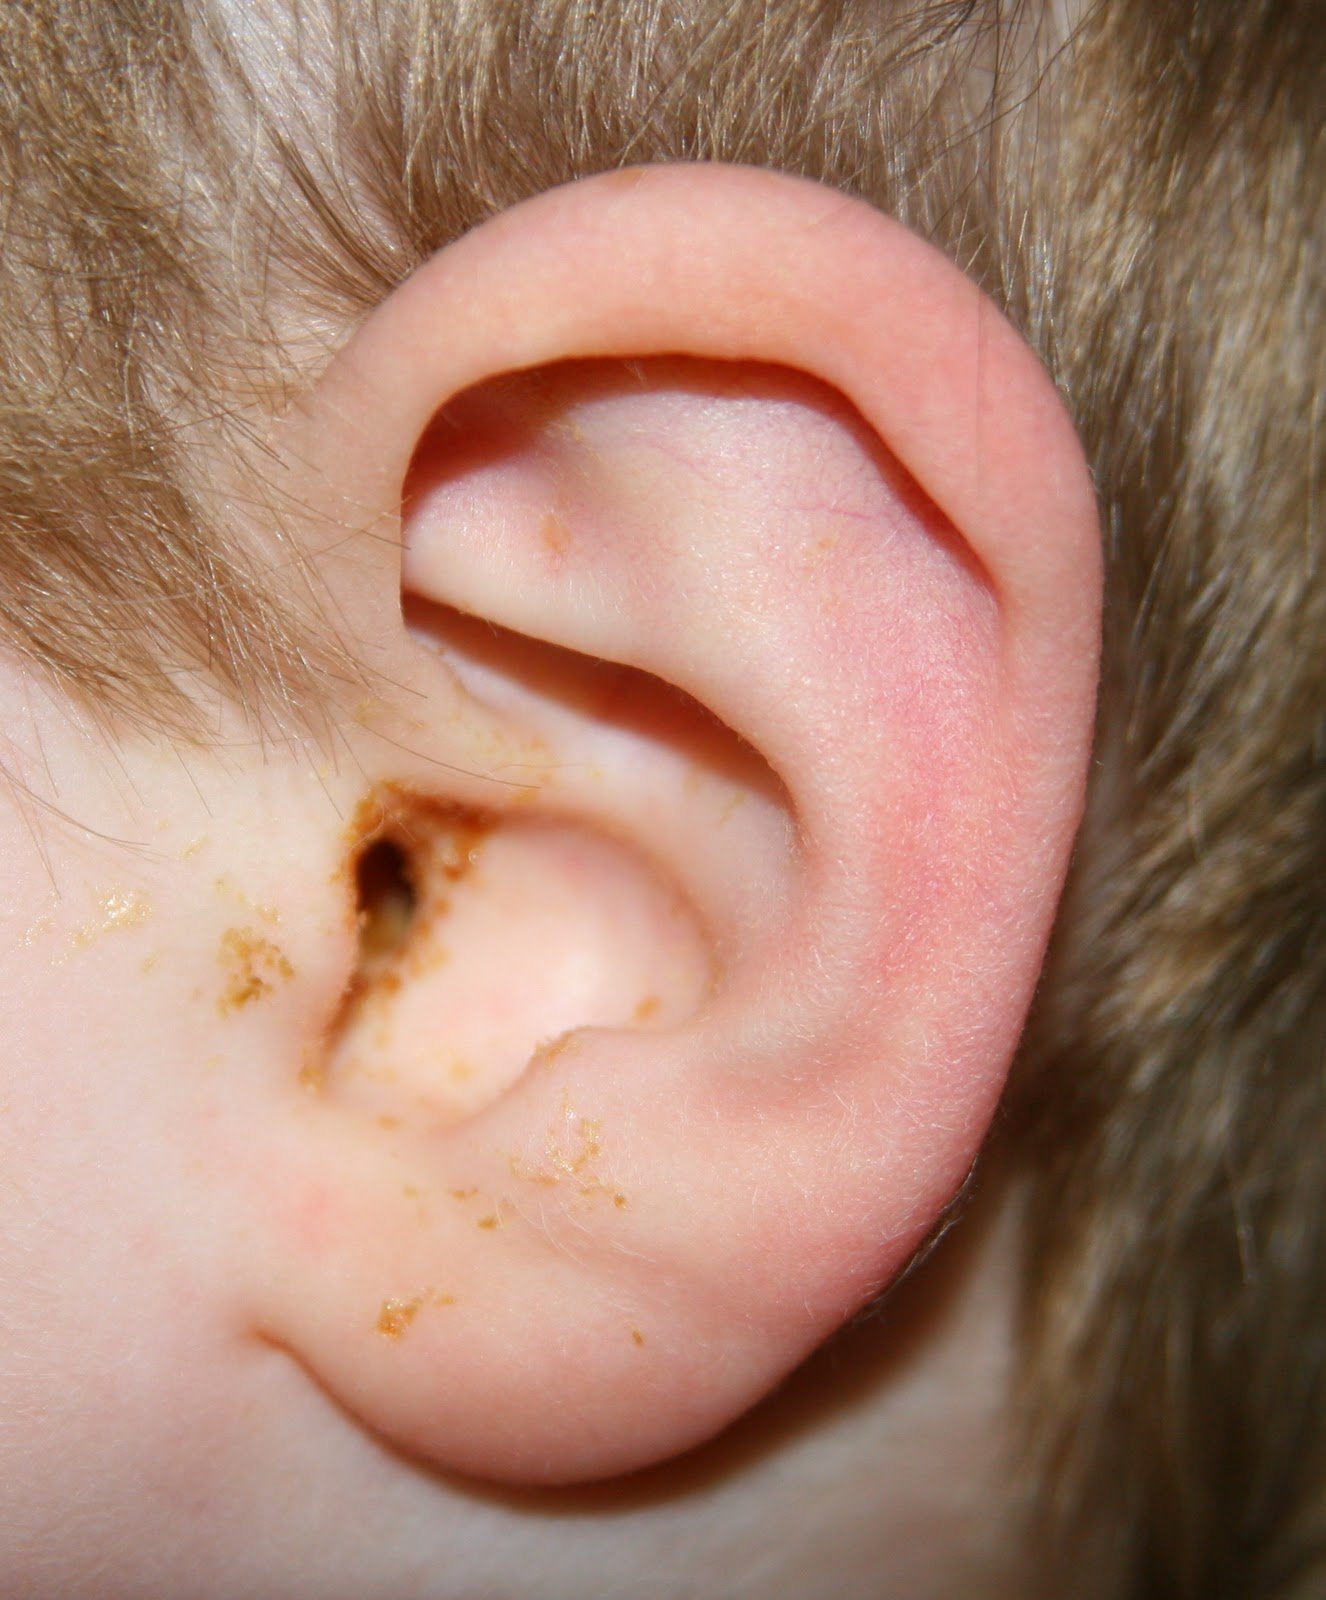 Ear Infection (Middle Ear) Causes, Symptoms, Diagnosis and Treatment ...